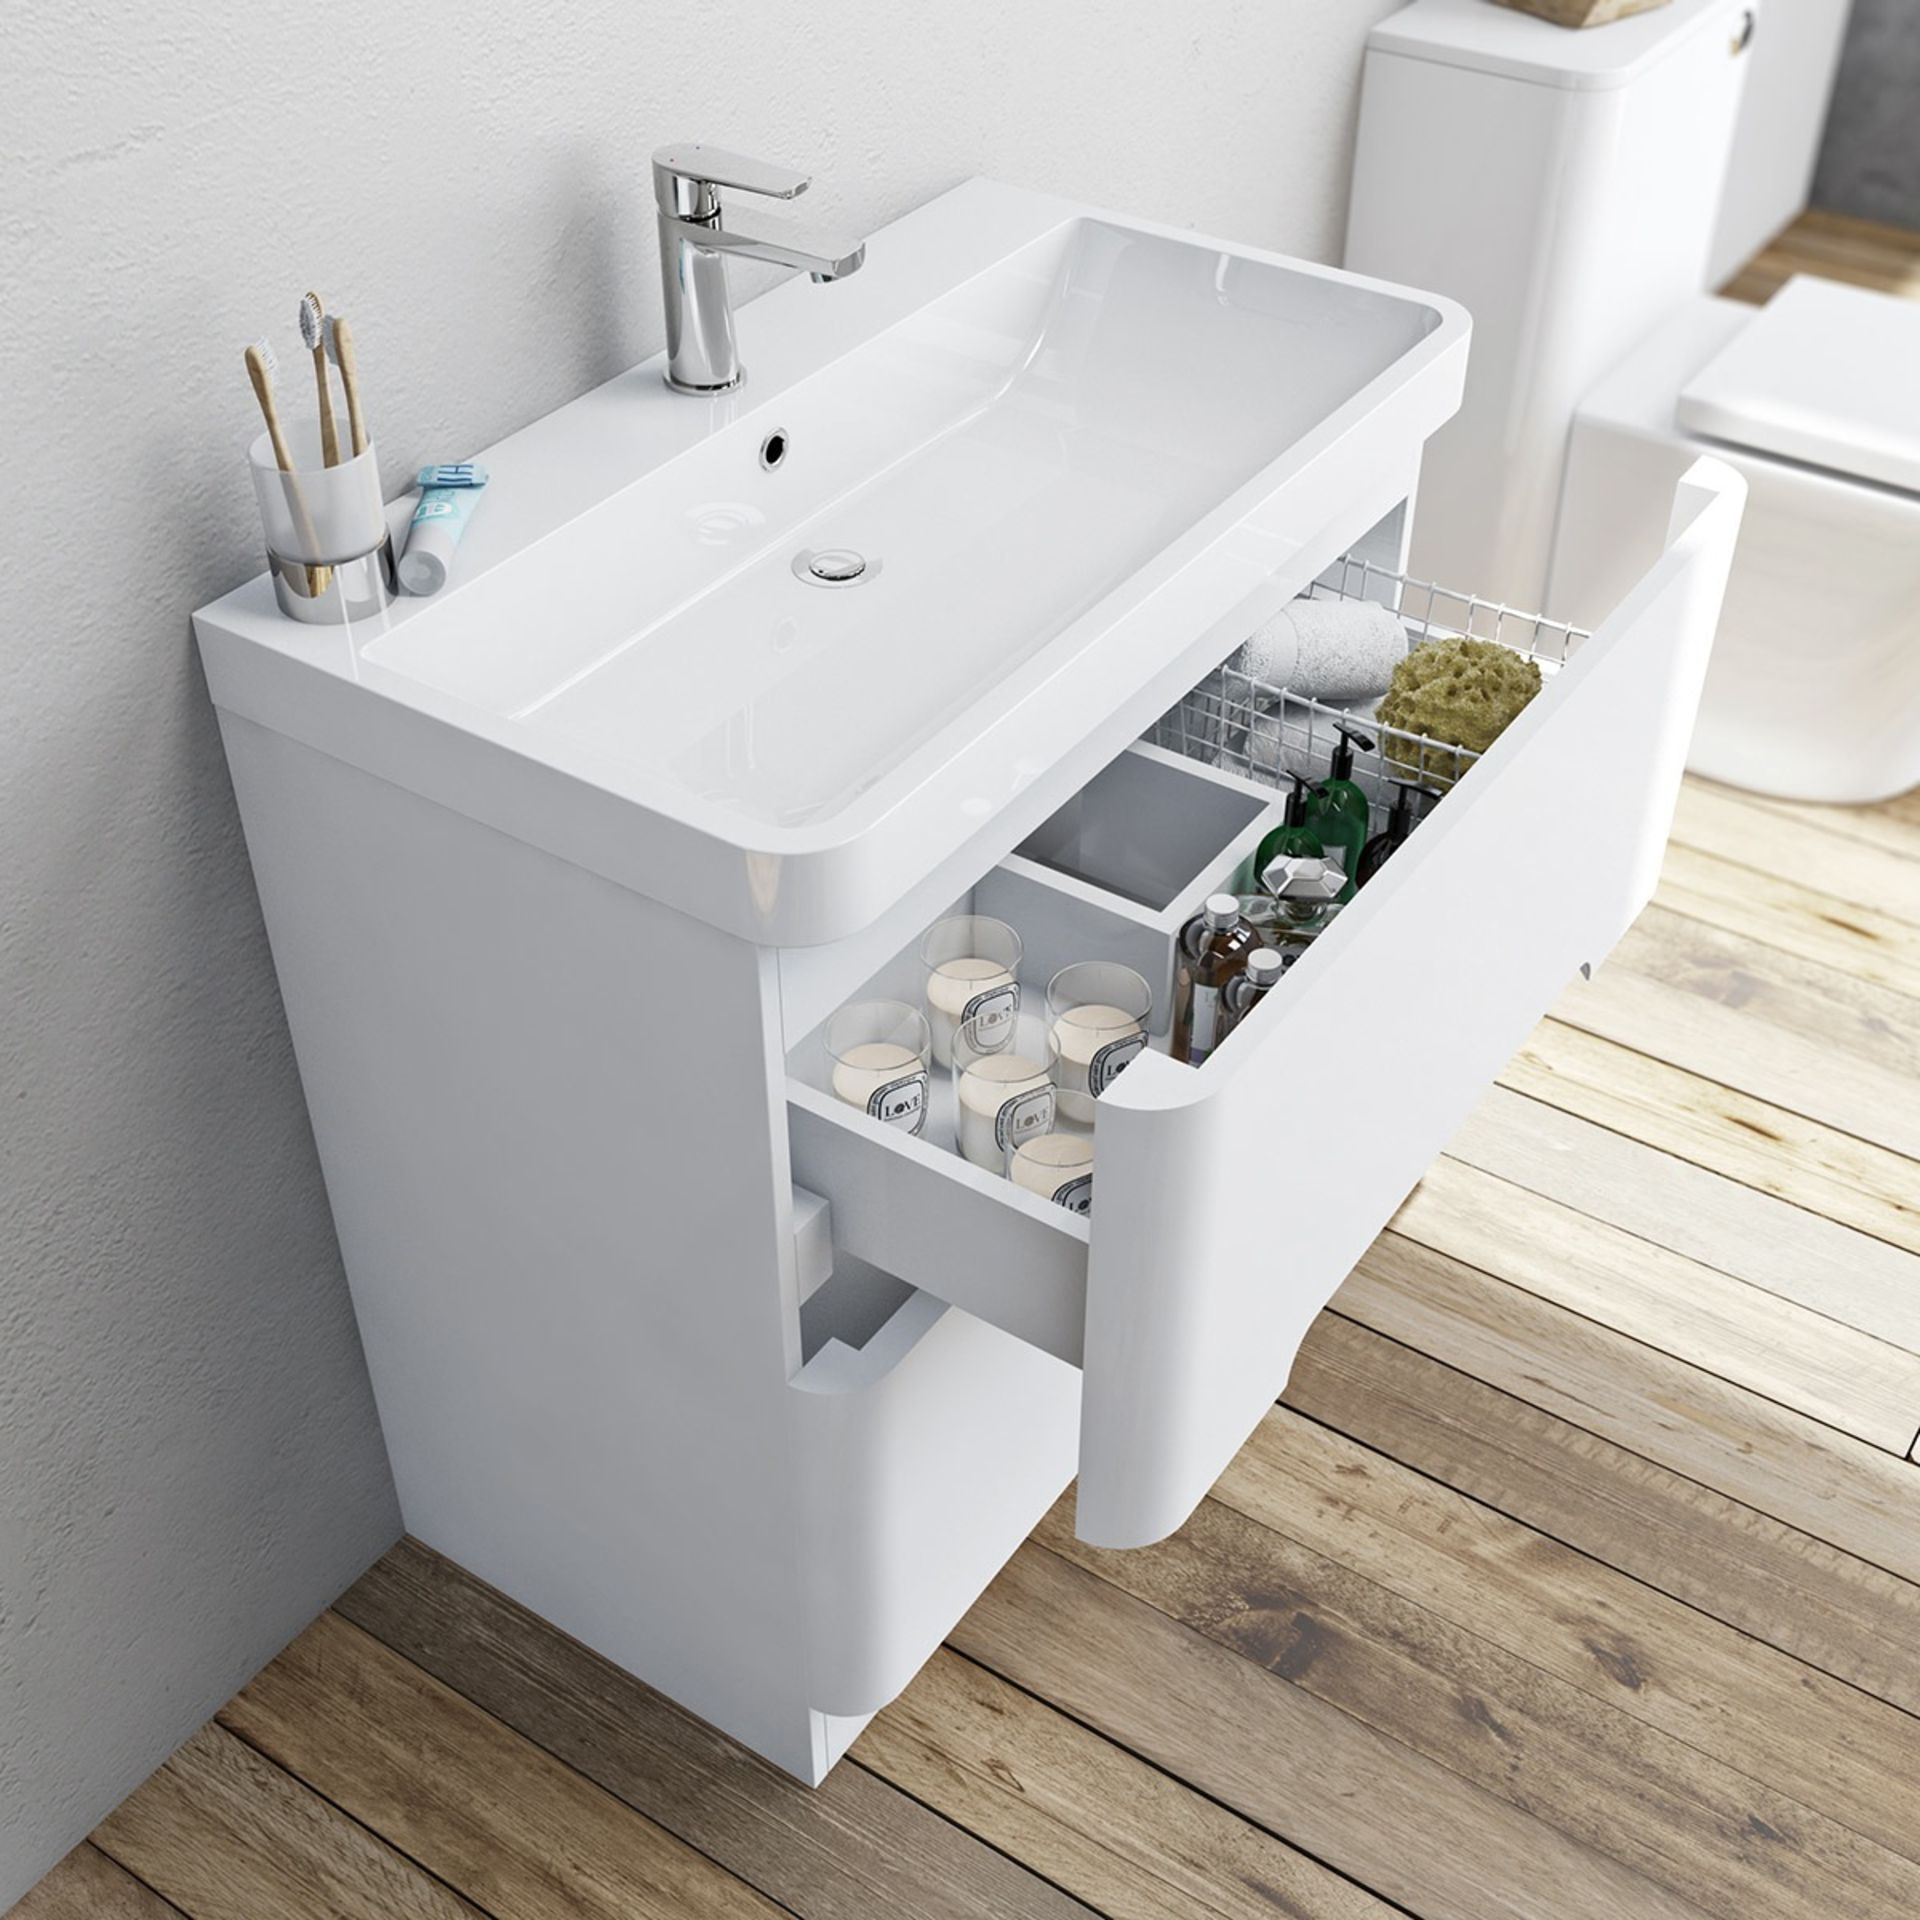 1 x Mode Planet White Gloss Bathroom Suite - Includes 600mm Vanity Soft Close Drawer Unit With - Image 13 of 14